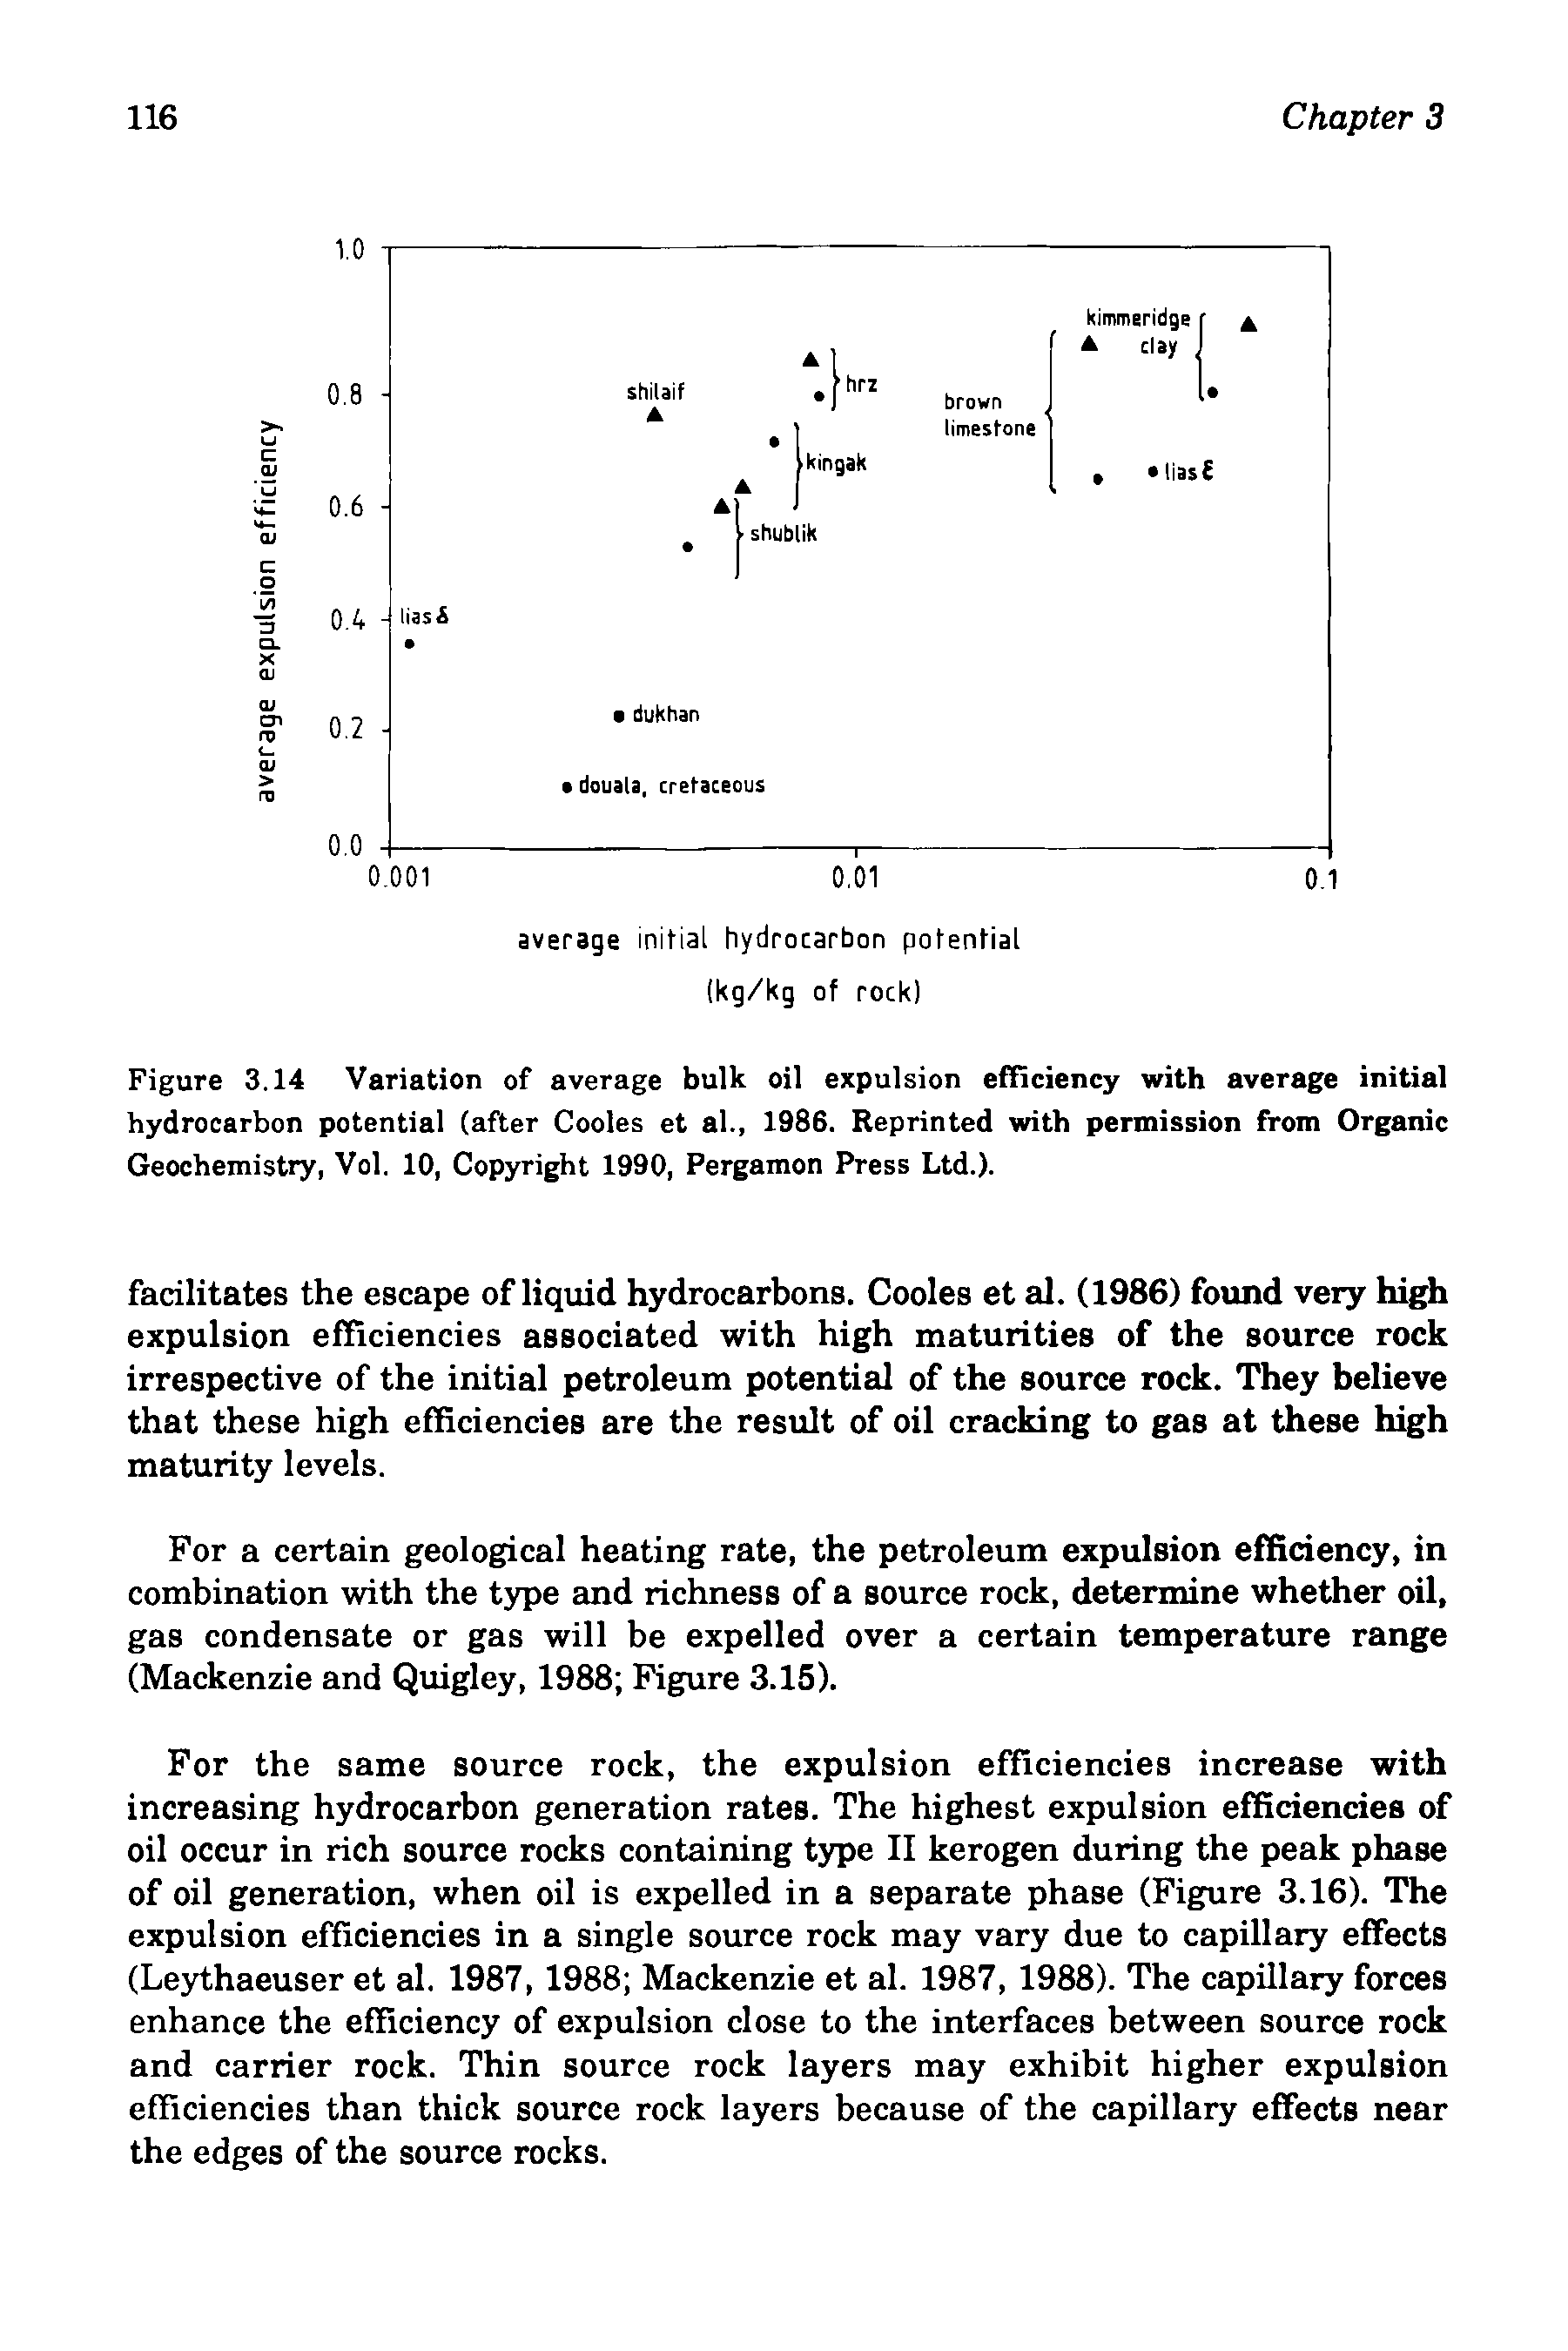 Figure 3.14 Variation of average bulk oil expulsion efficiency with average initial hydrocarbon potential (after Cooles et al., 1986. Reprinted with permission from Organic Geochemistry, Vol. 10, Copyright 1990, Pergamon Press Ltd.).